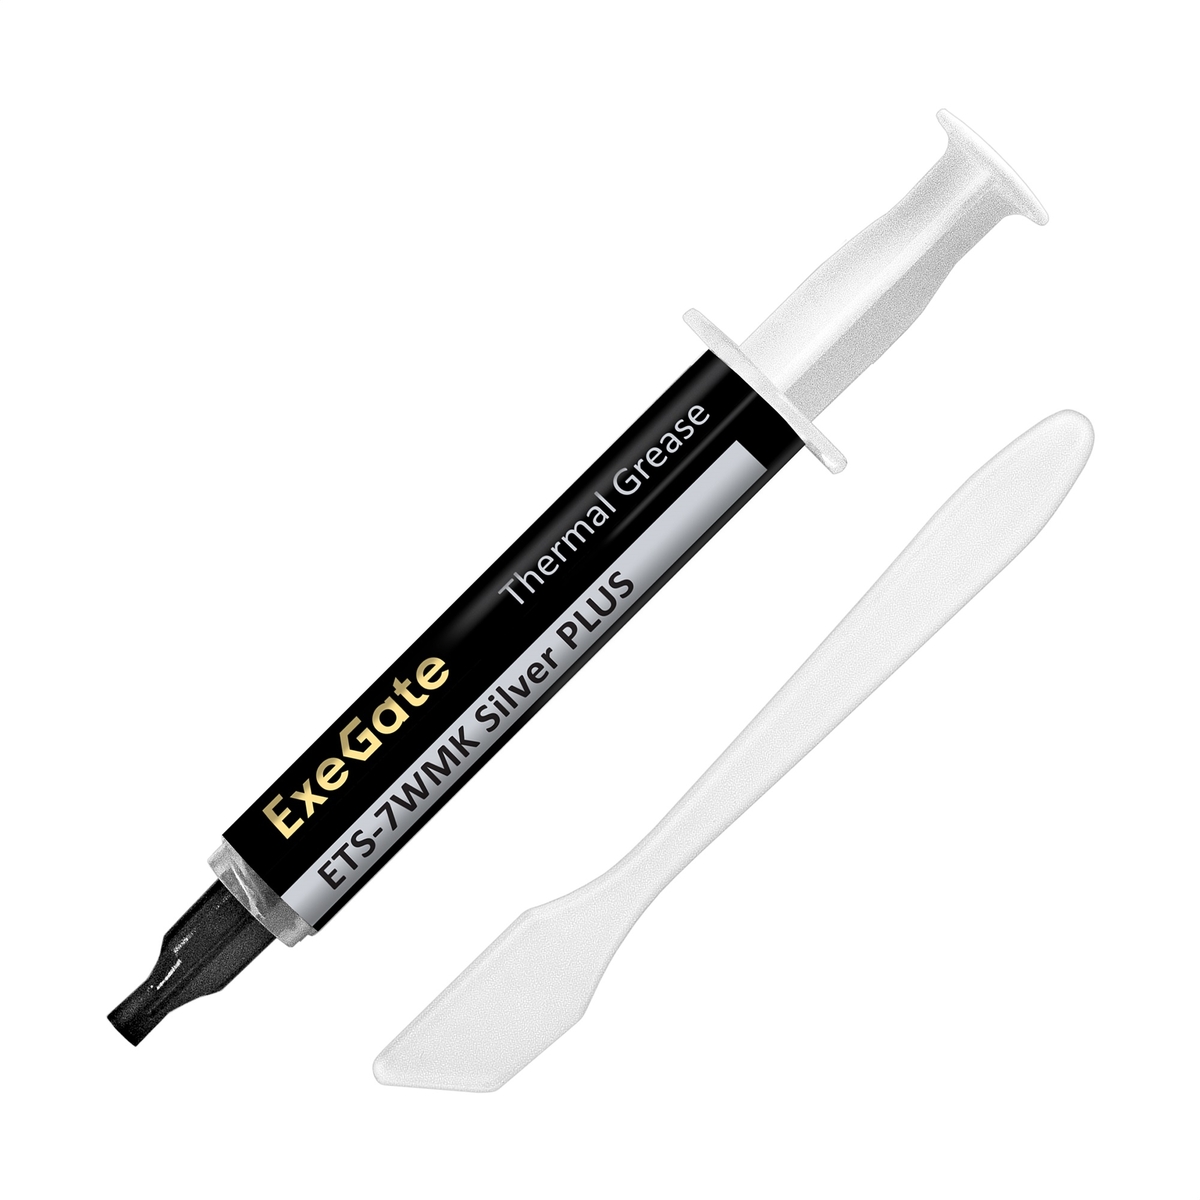 Thermal grease ExeGate ETS-7WMK Silver PLUS 3g